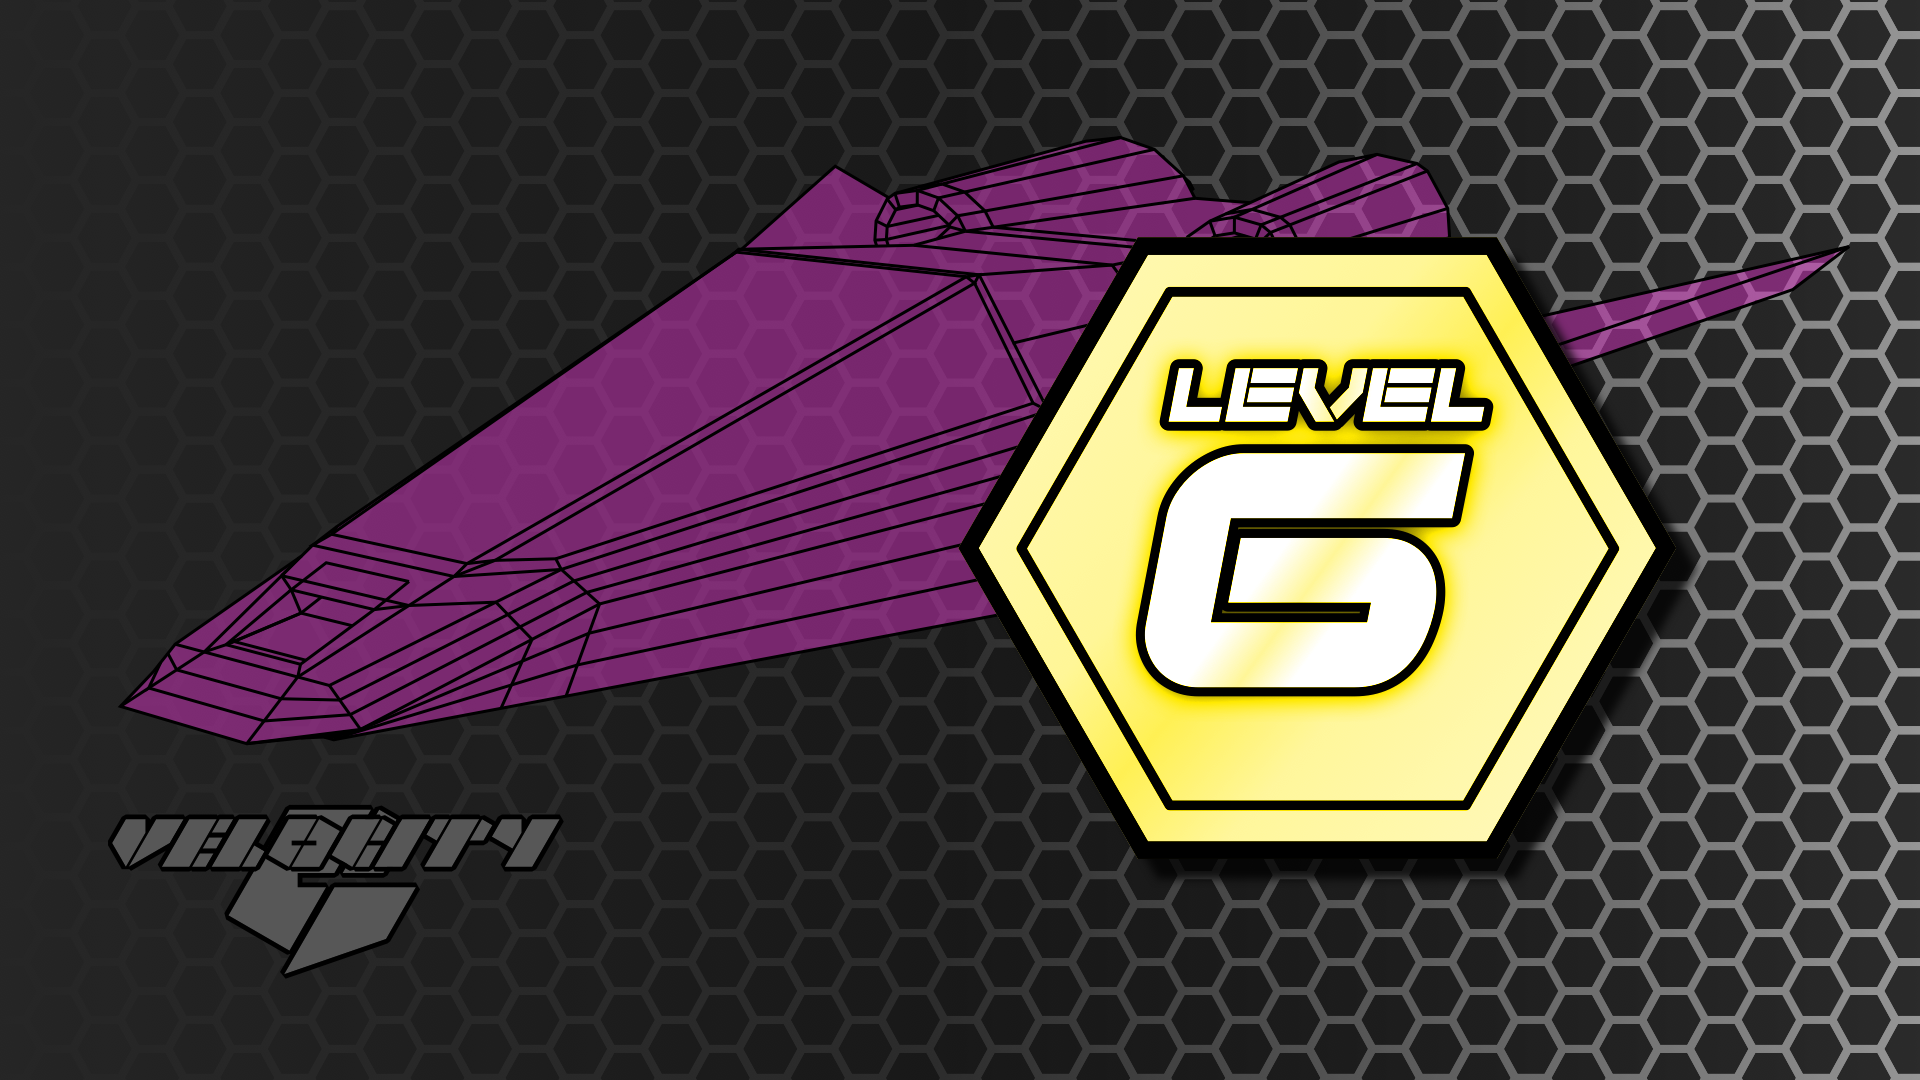 Icon for Reach level 6